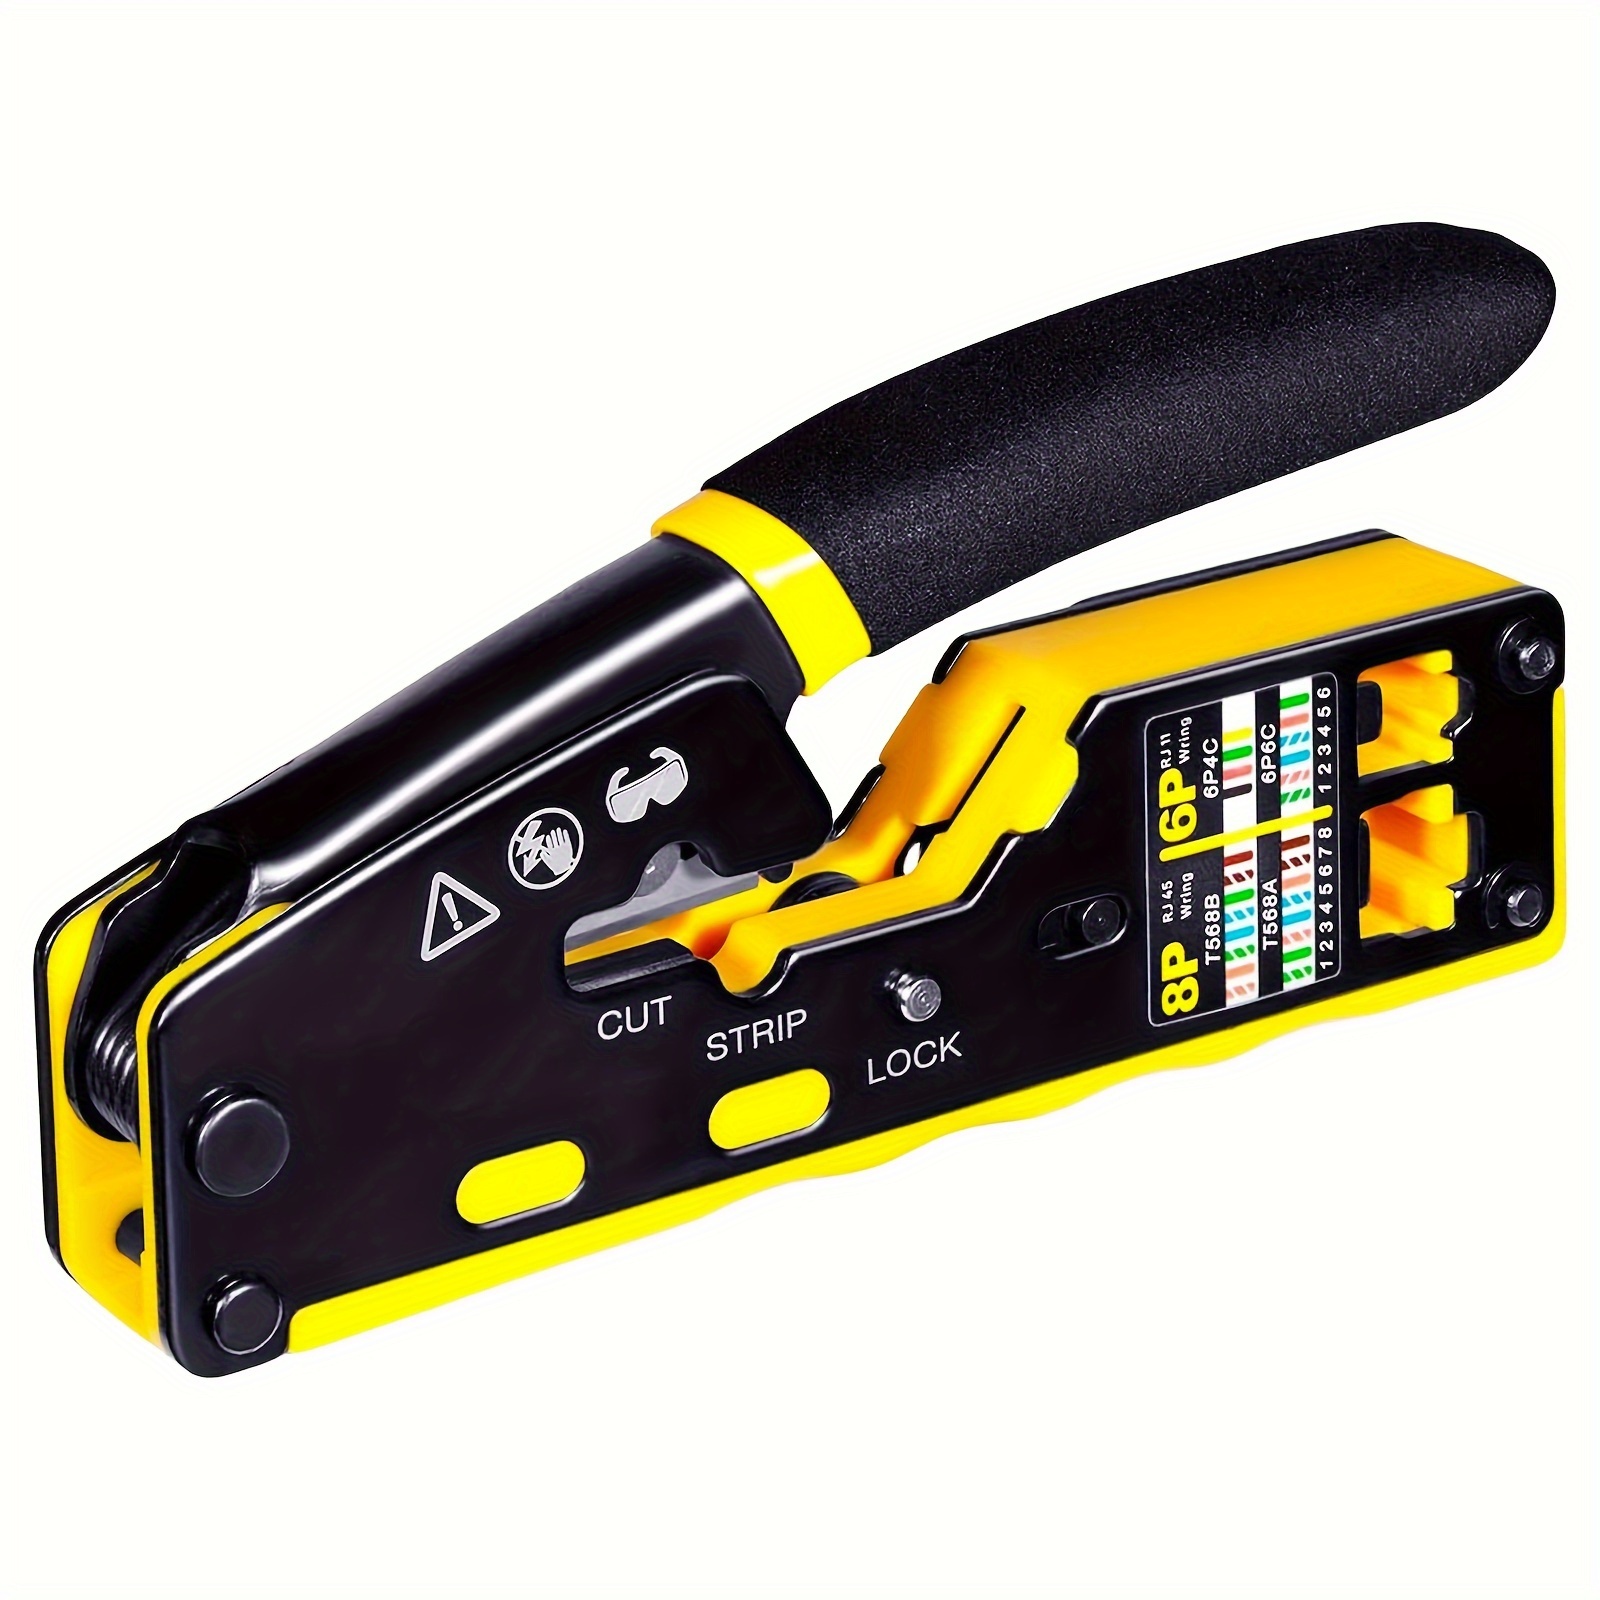 

easy Setup" Rj45 Crimp Tool Kit - All-in-one Ethernet Crimper For Cat5, Cat5e, Cat6, Cat7, Cat8 With Wire Stripper/cutter, Network Lan Cable Tester, Steel, Black - No Assembly Required